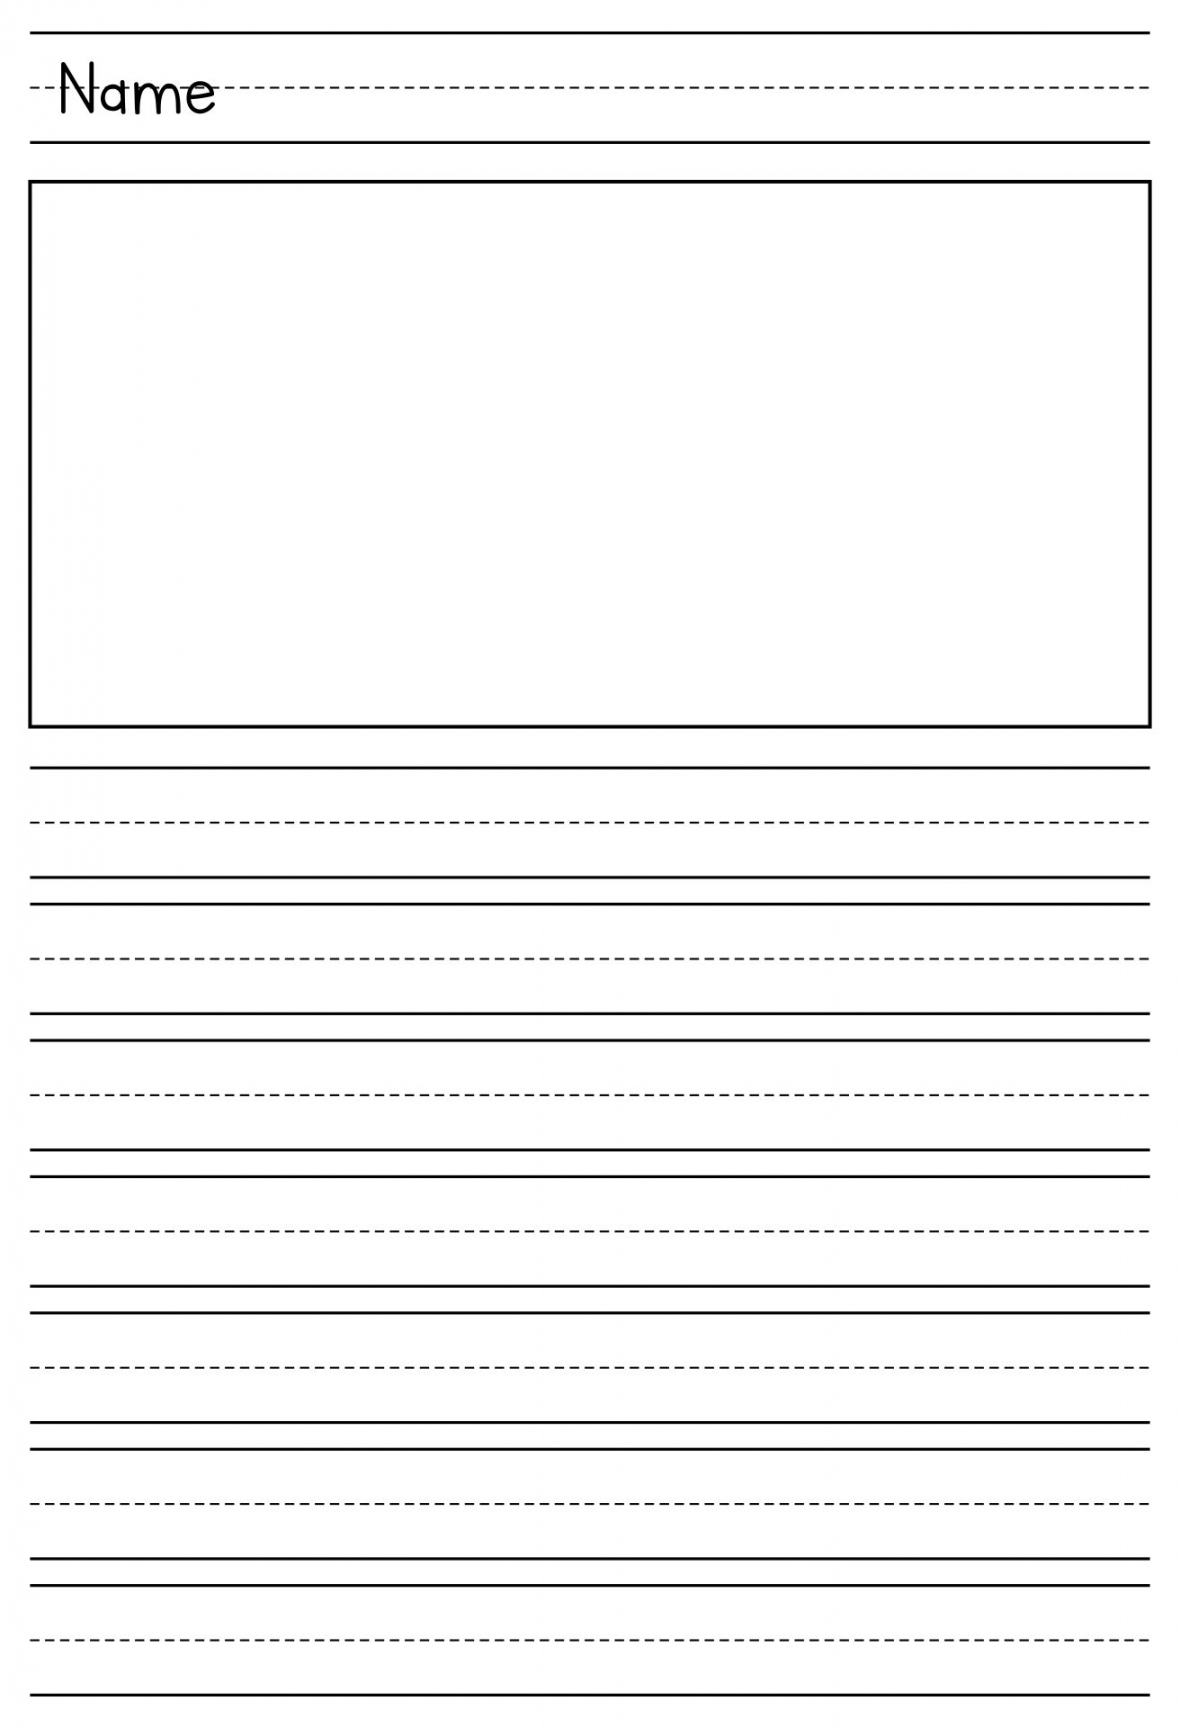 Best Printable Primary Writing Paper Template - printablee - Kindergarten Printable Writing Paper